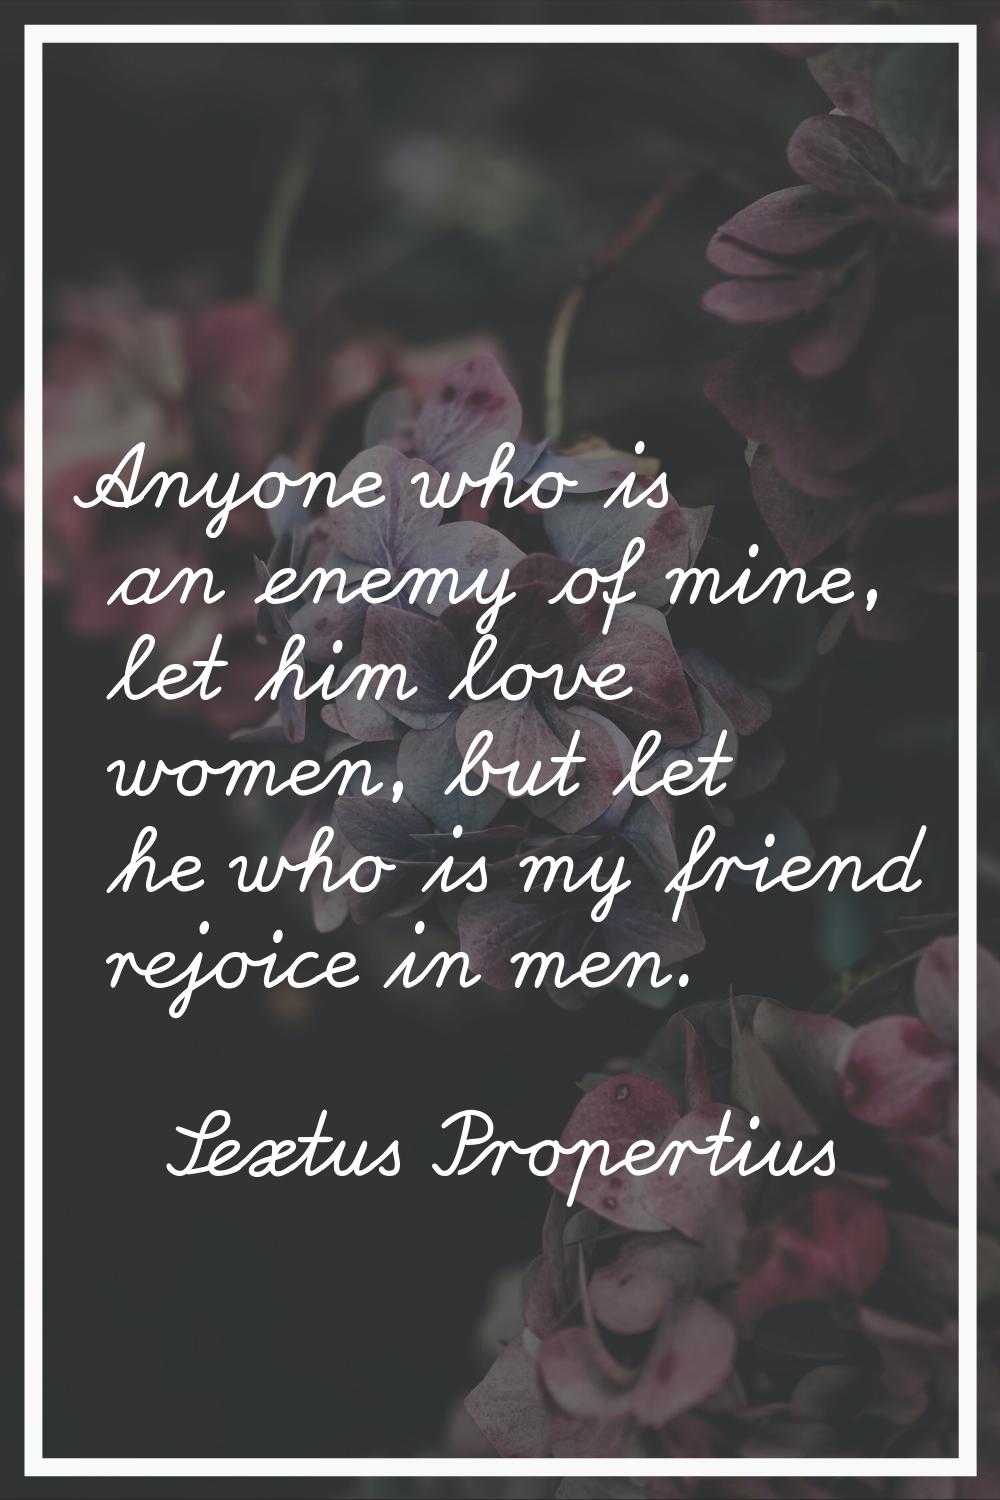 Anyone who is an enemy of mine, let him love women, but let he who is my friend rejoice in men.